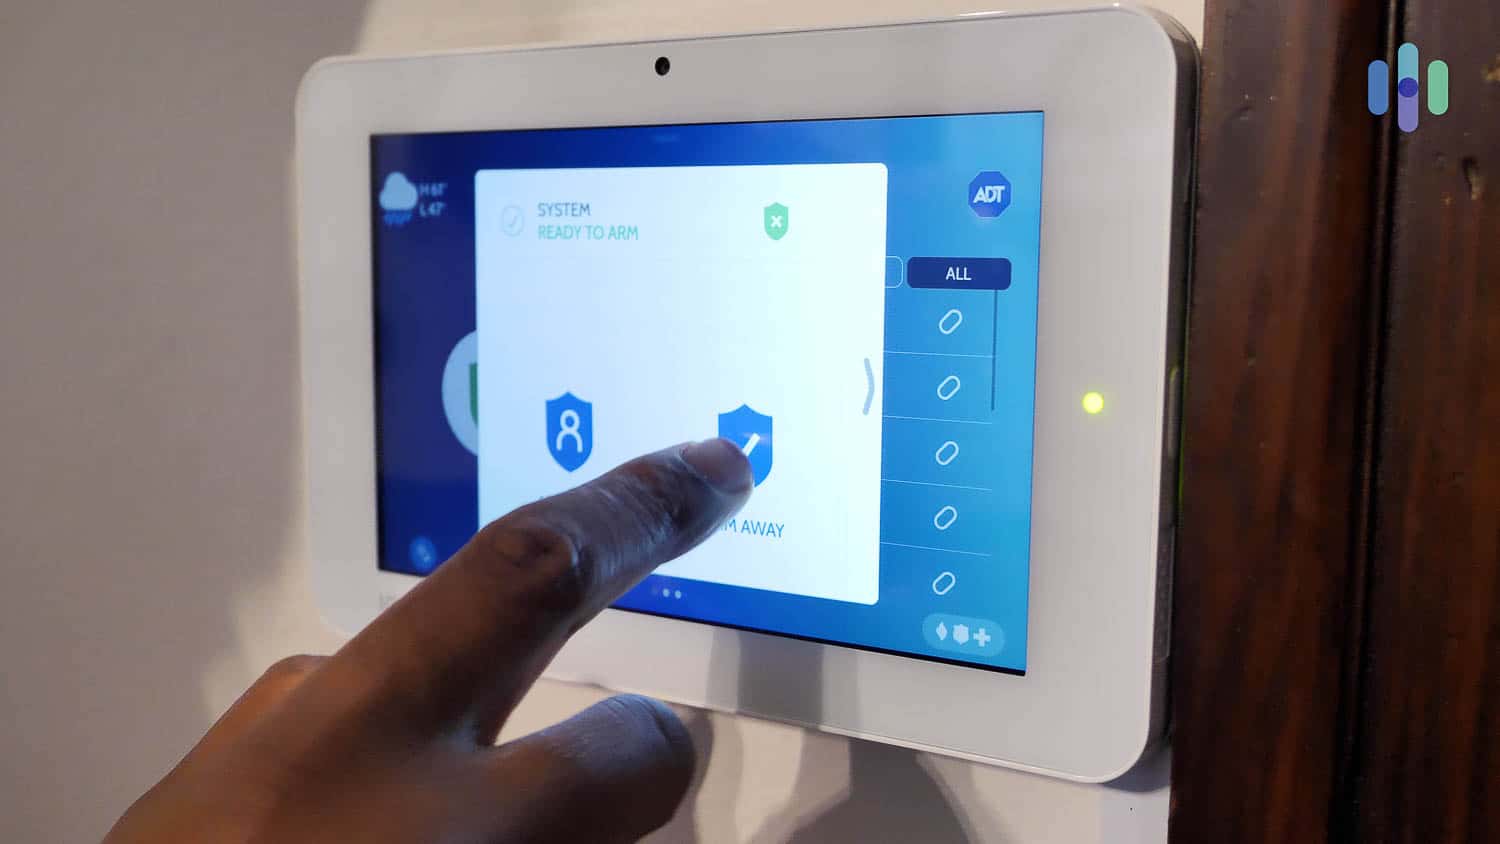 Arming with ADT Home Security Control Panel